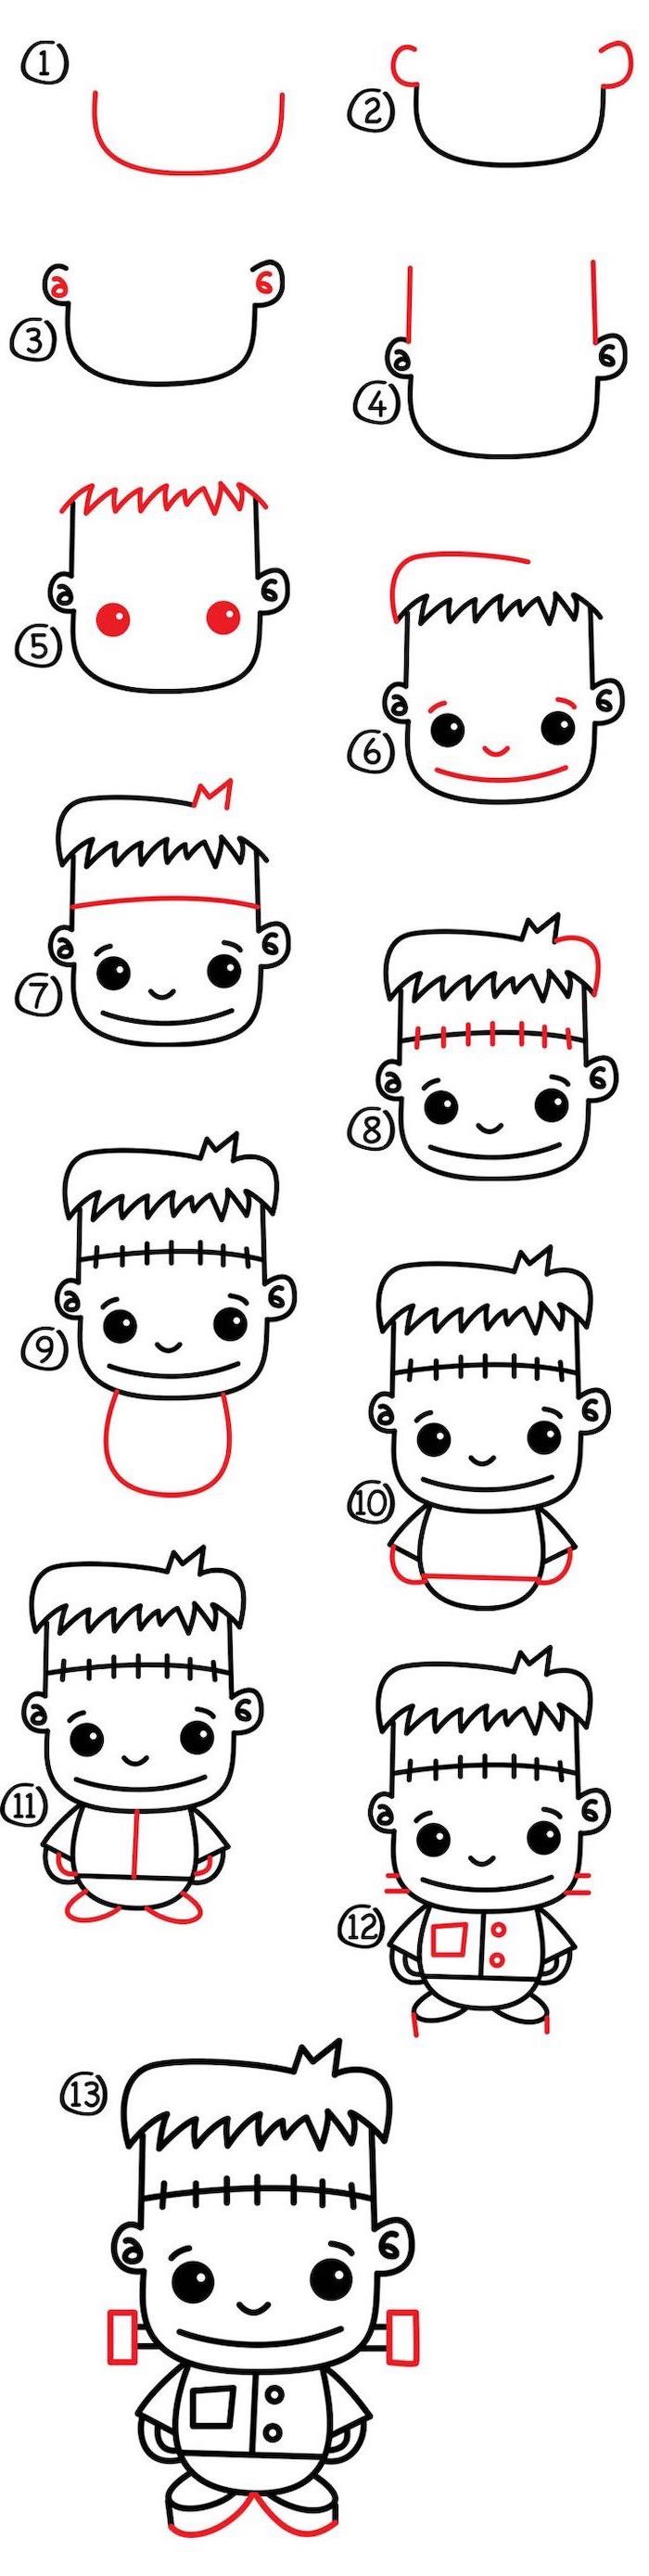 cute kawaii drawings, how to draw frankenstein, step by step diy tutorial, white background